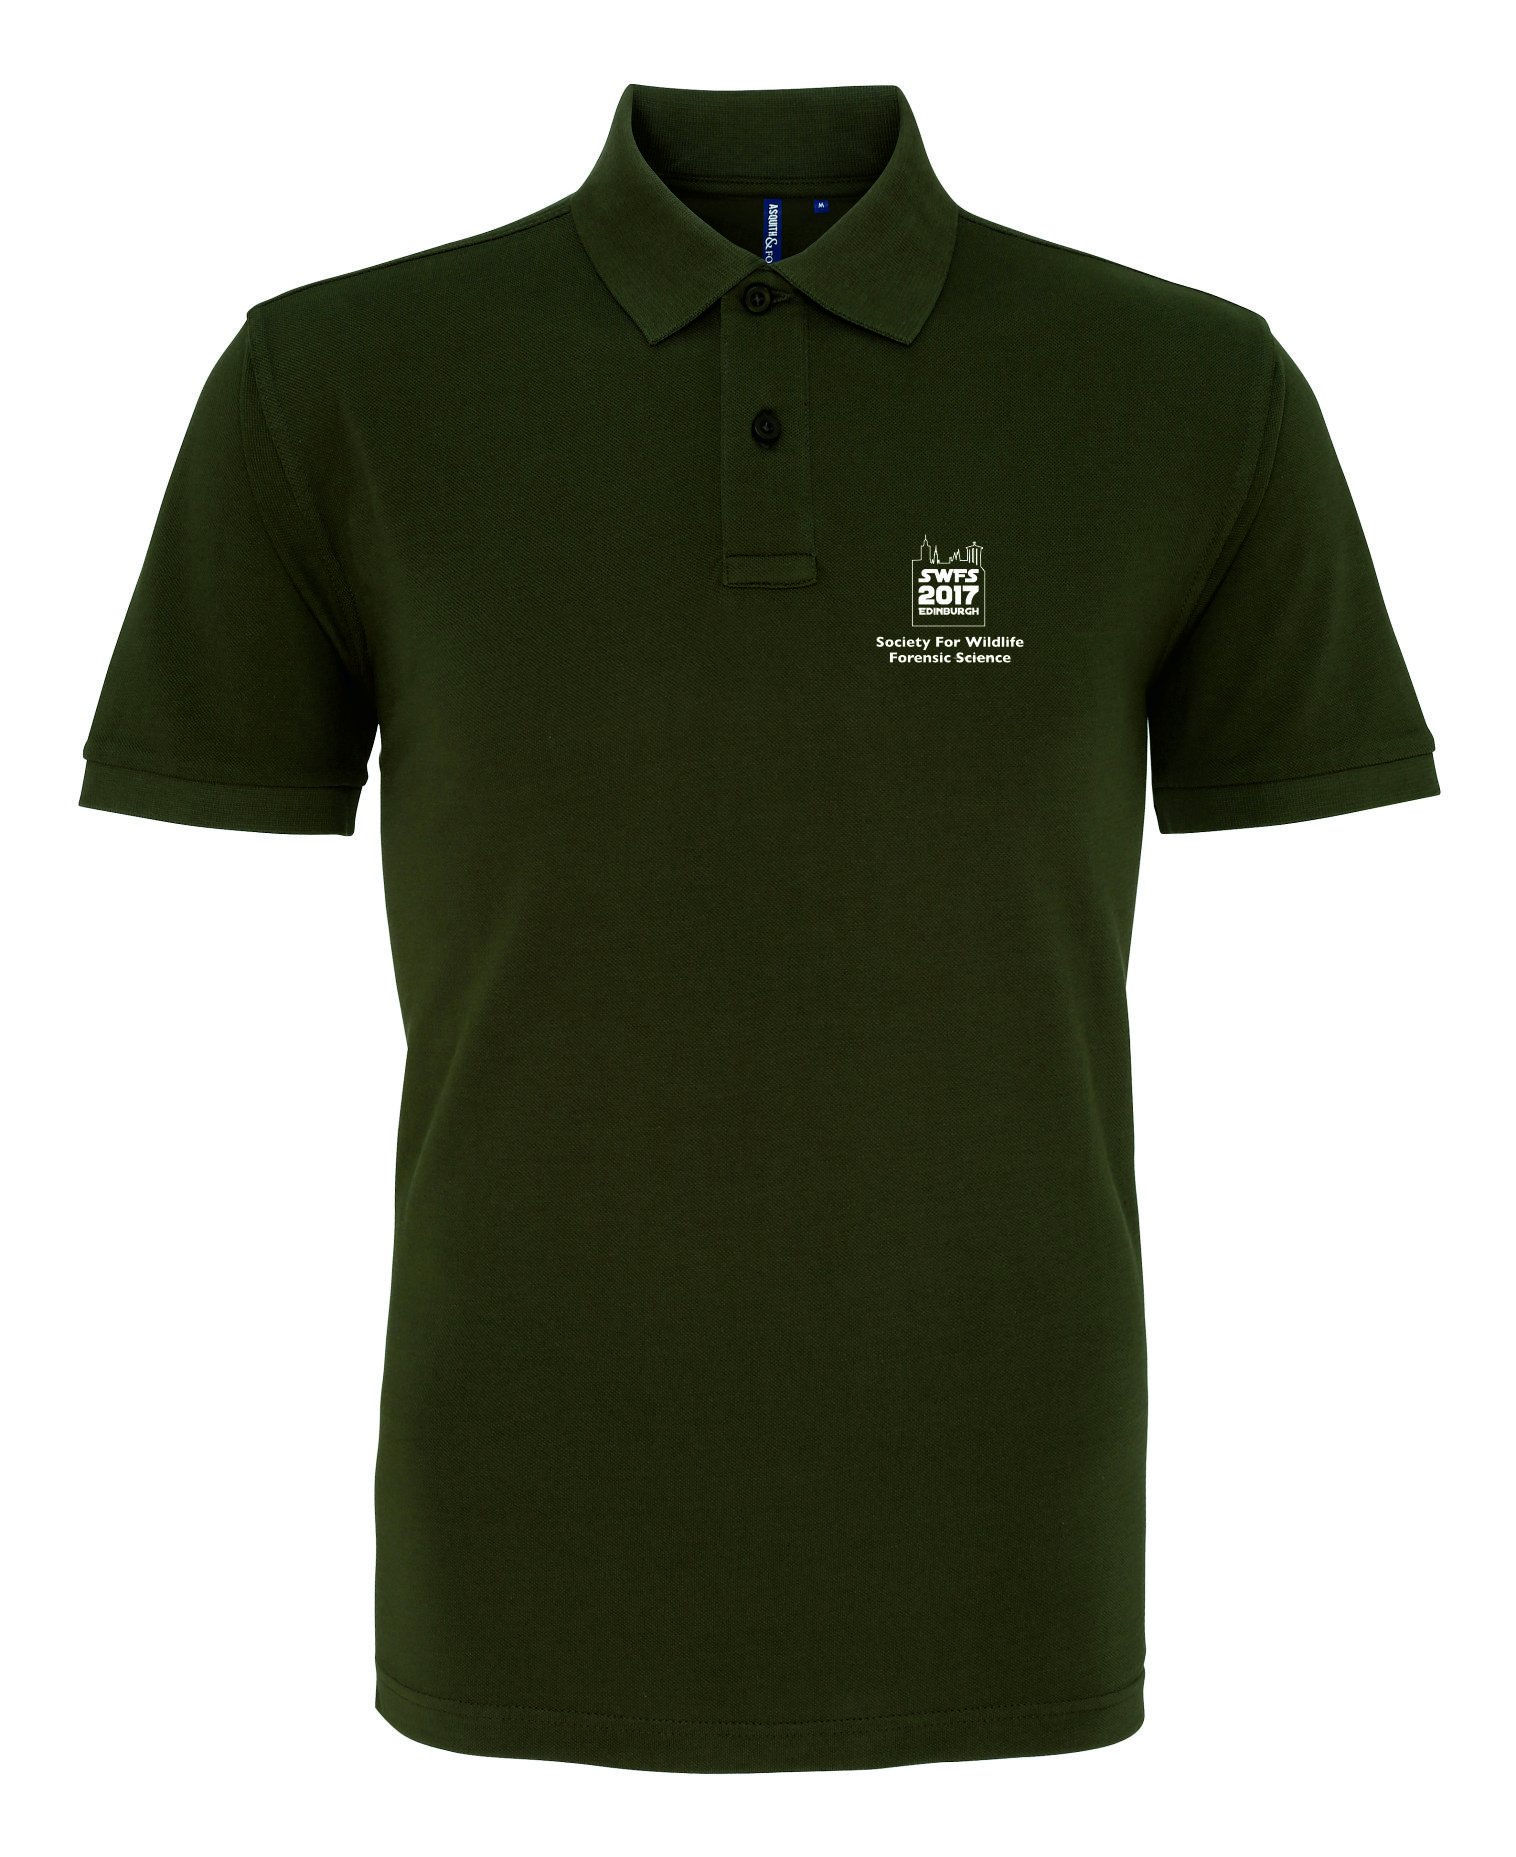 Society for Wildlife Forensic Science Polo – Military Green | Society ...